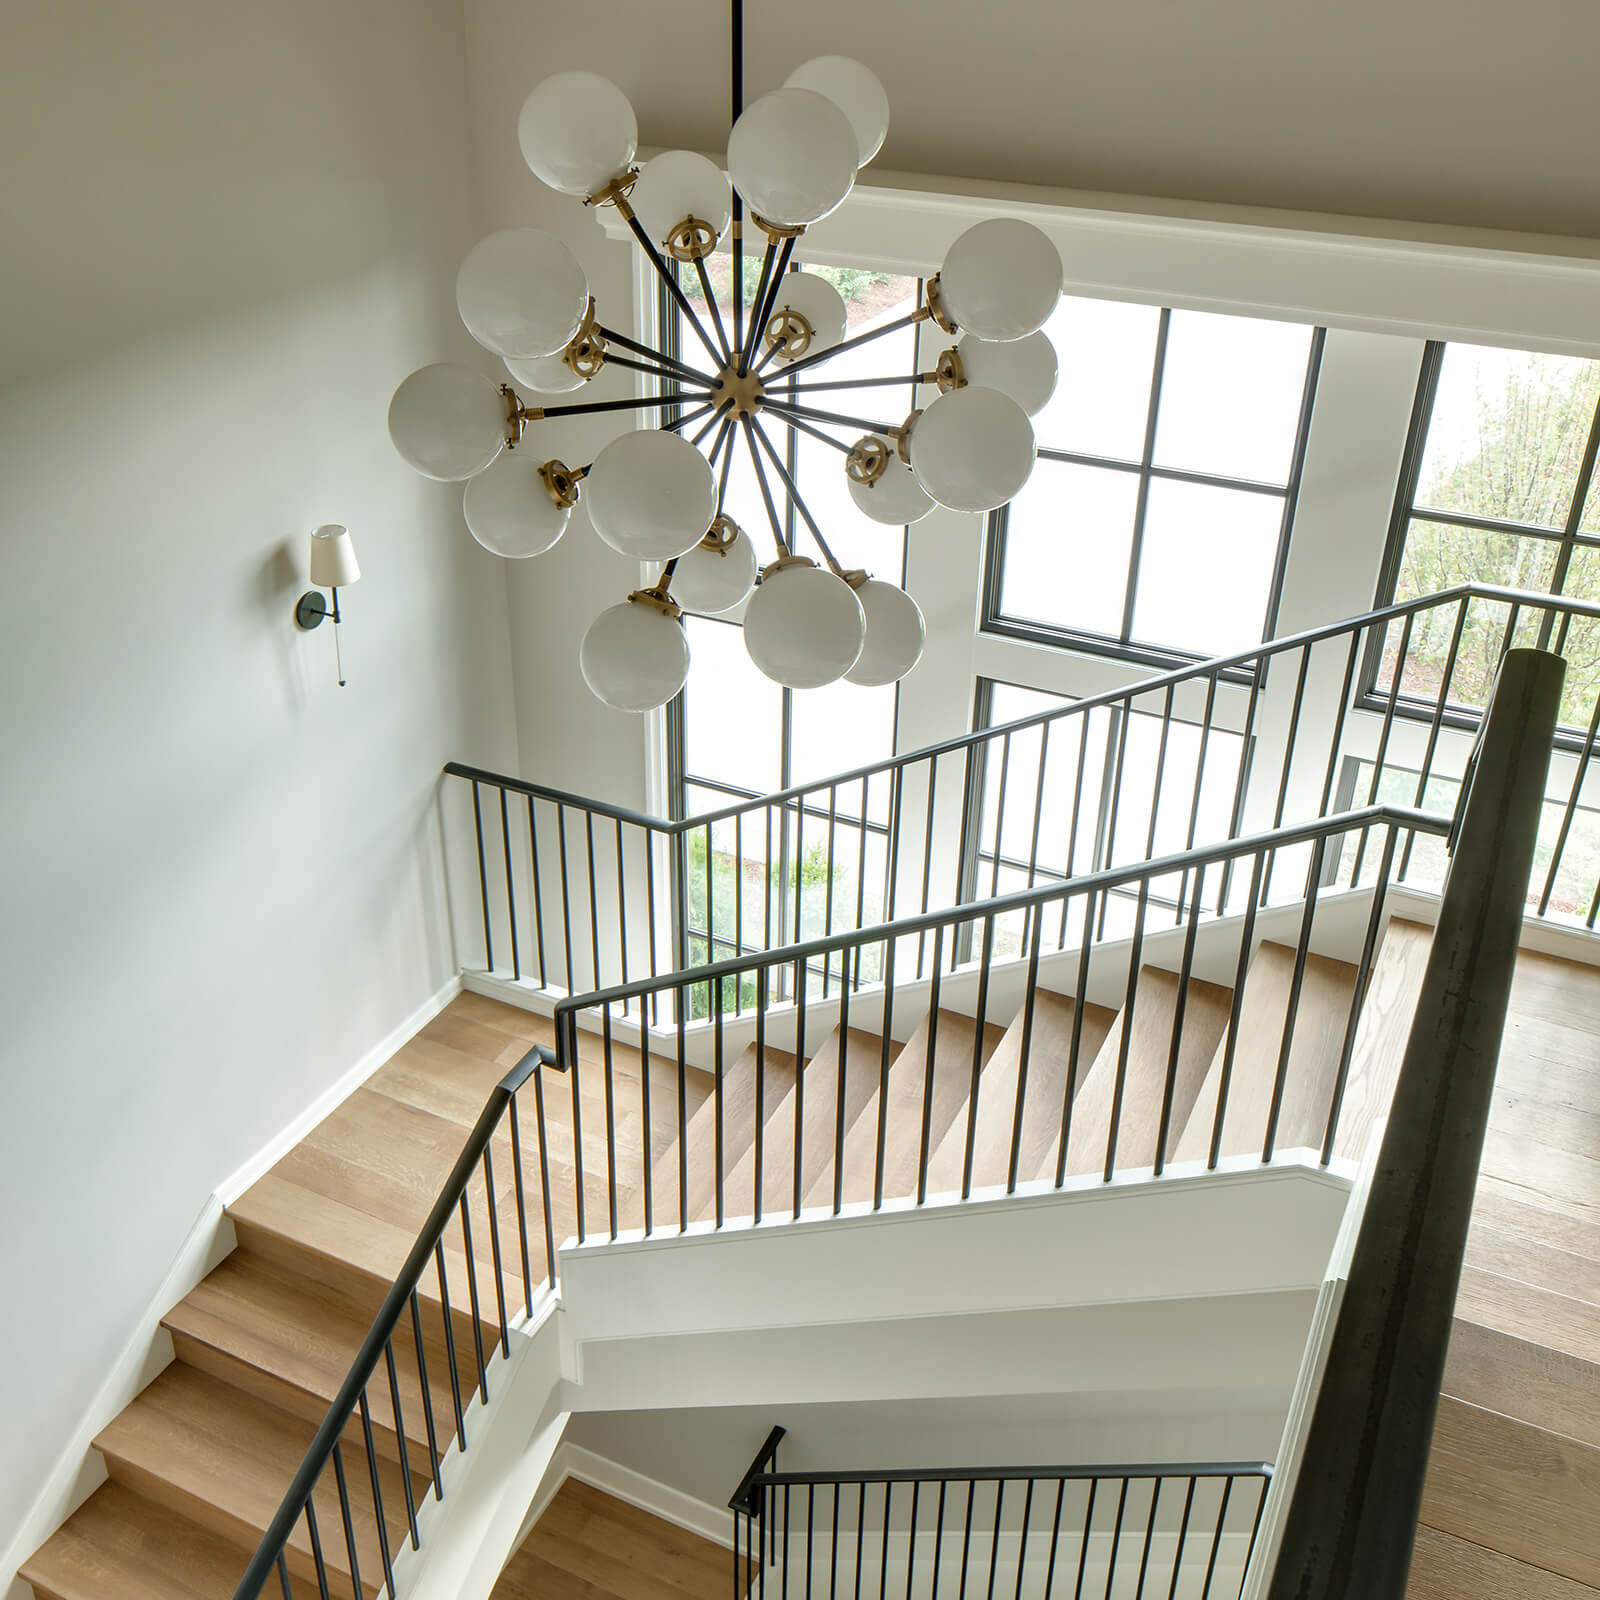 Interior stairwell view looking out to Marvin Signature Ultimate Casement Windows